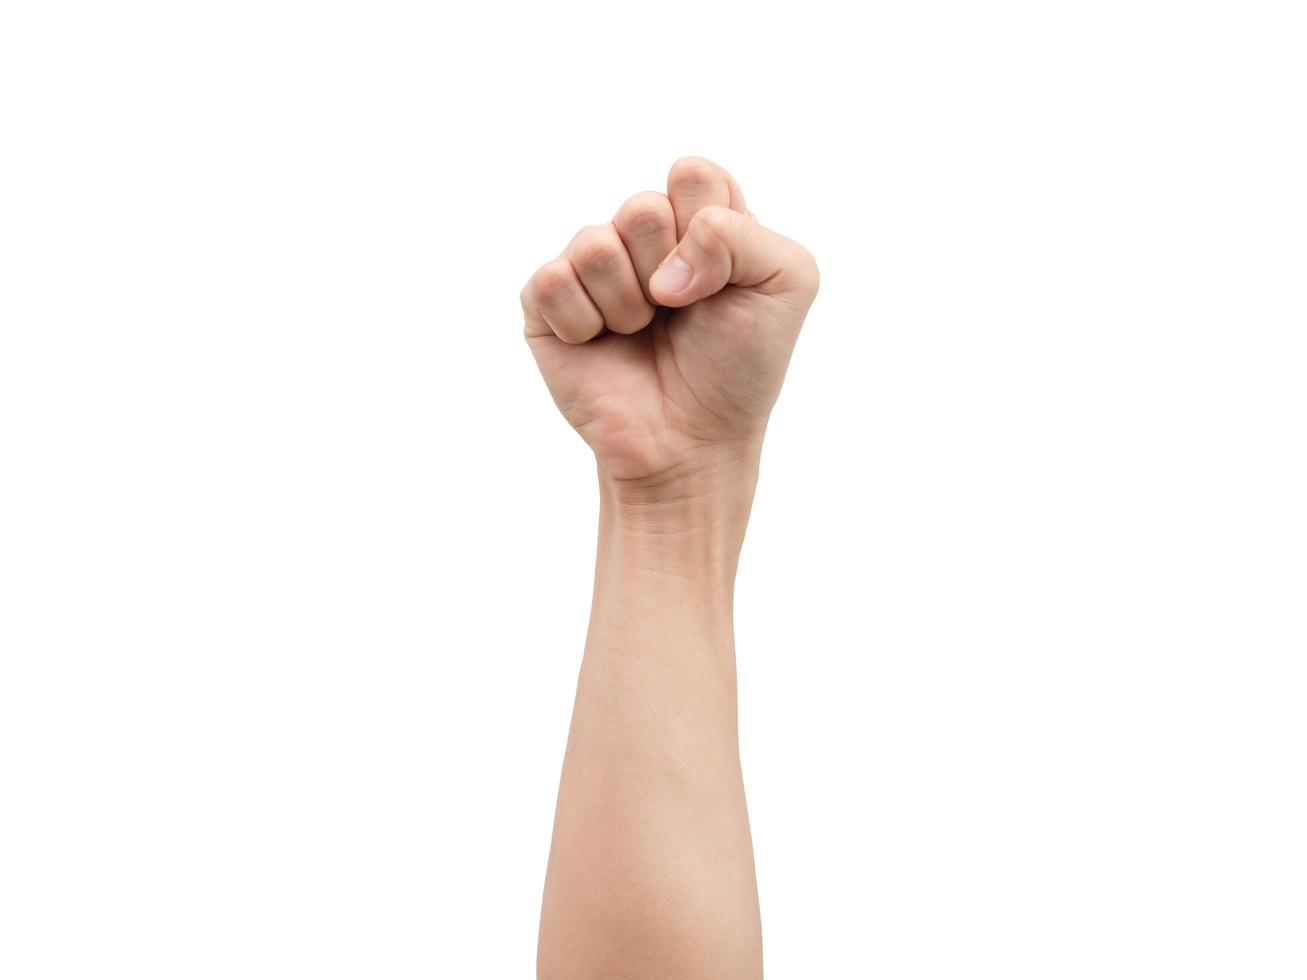 Male hand fist up white isolated photo